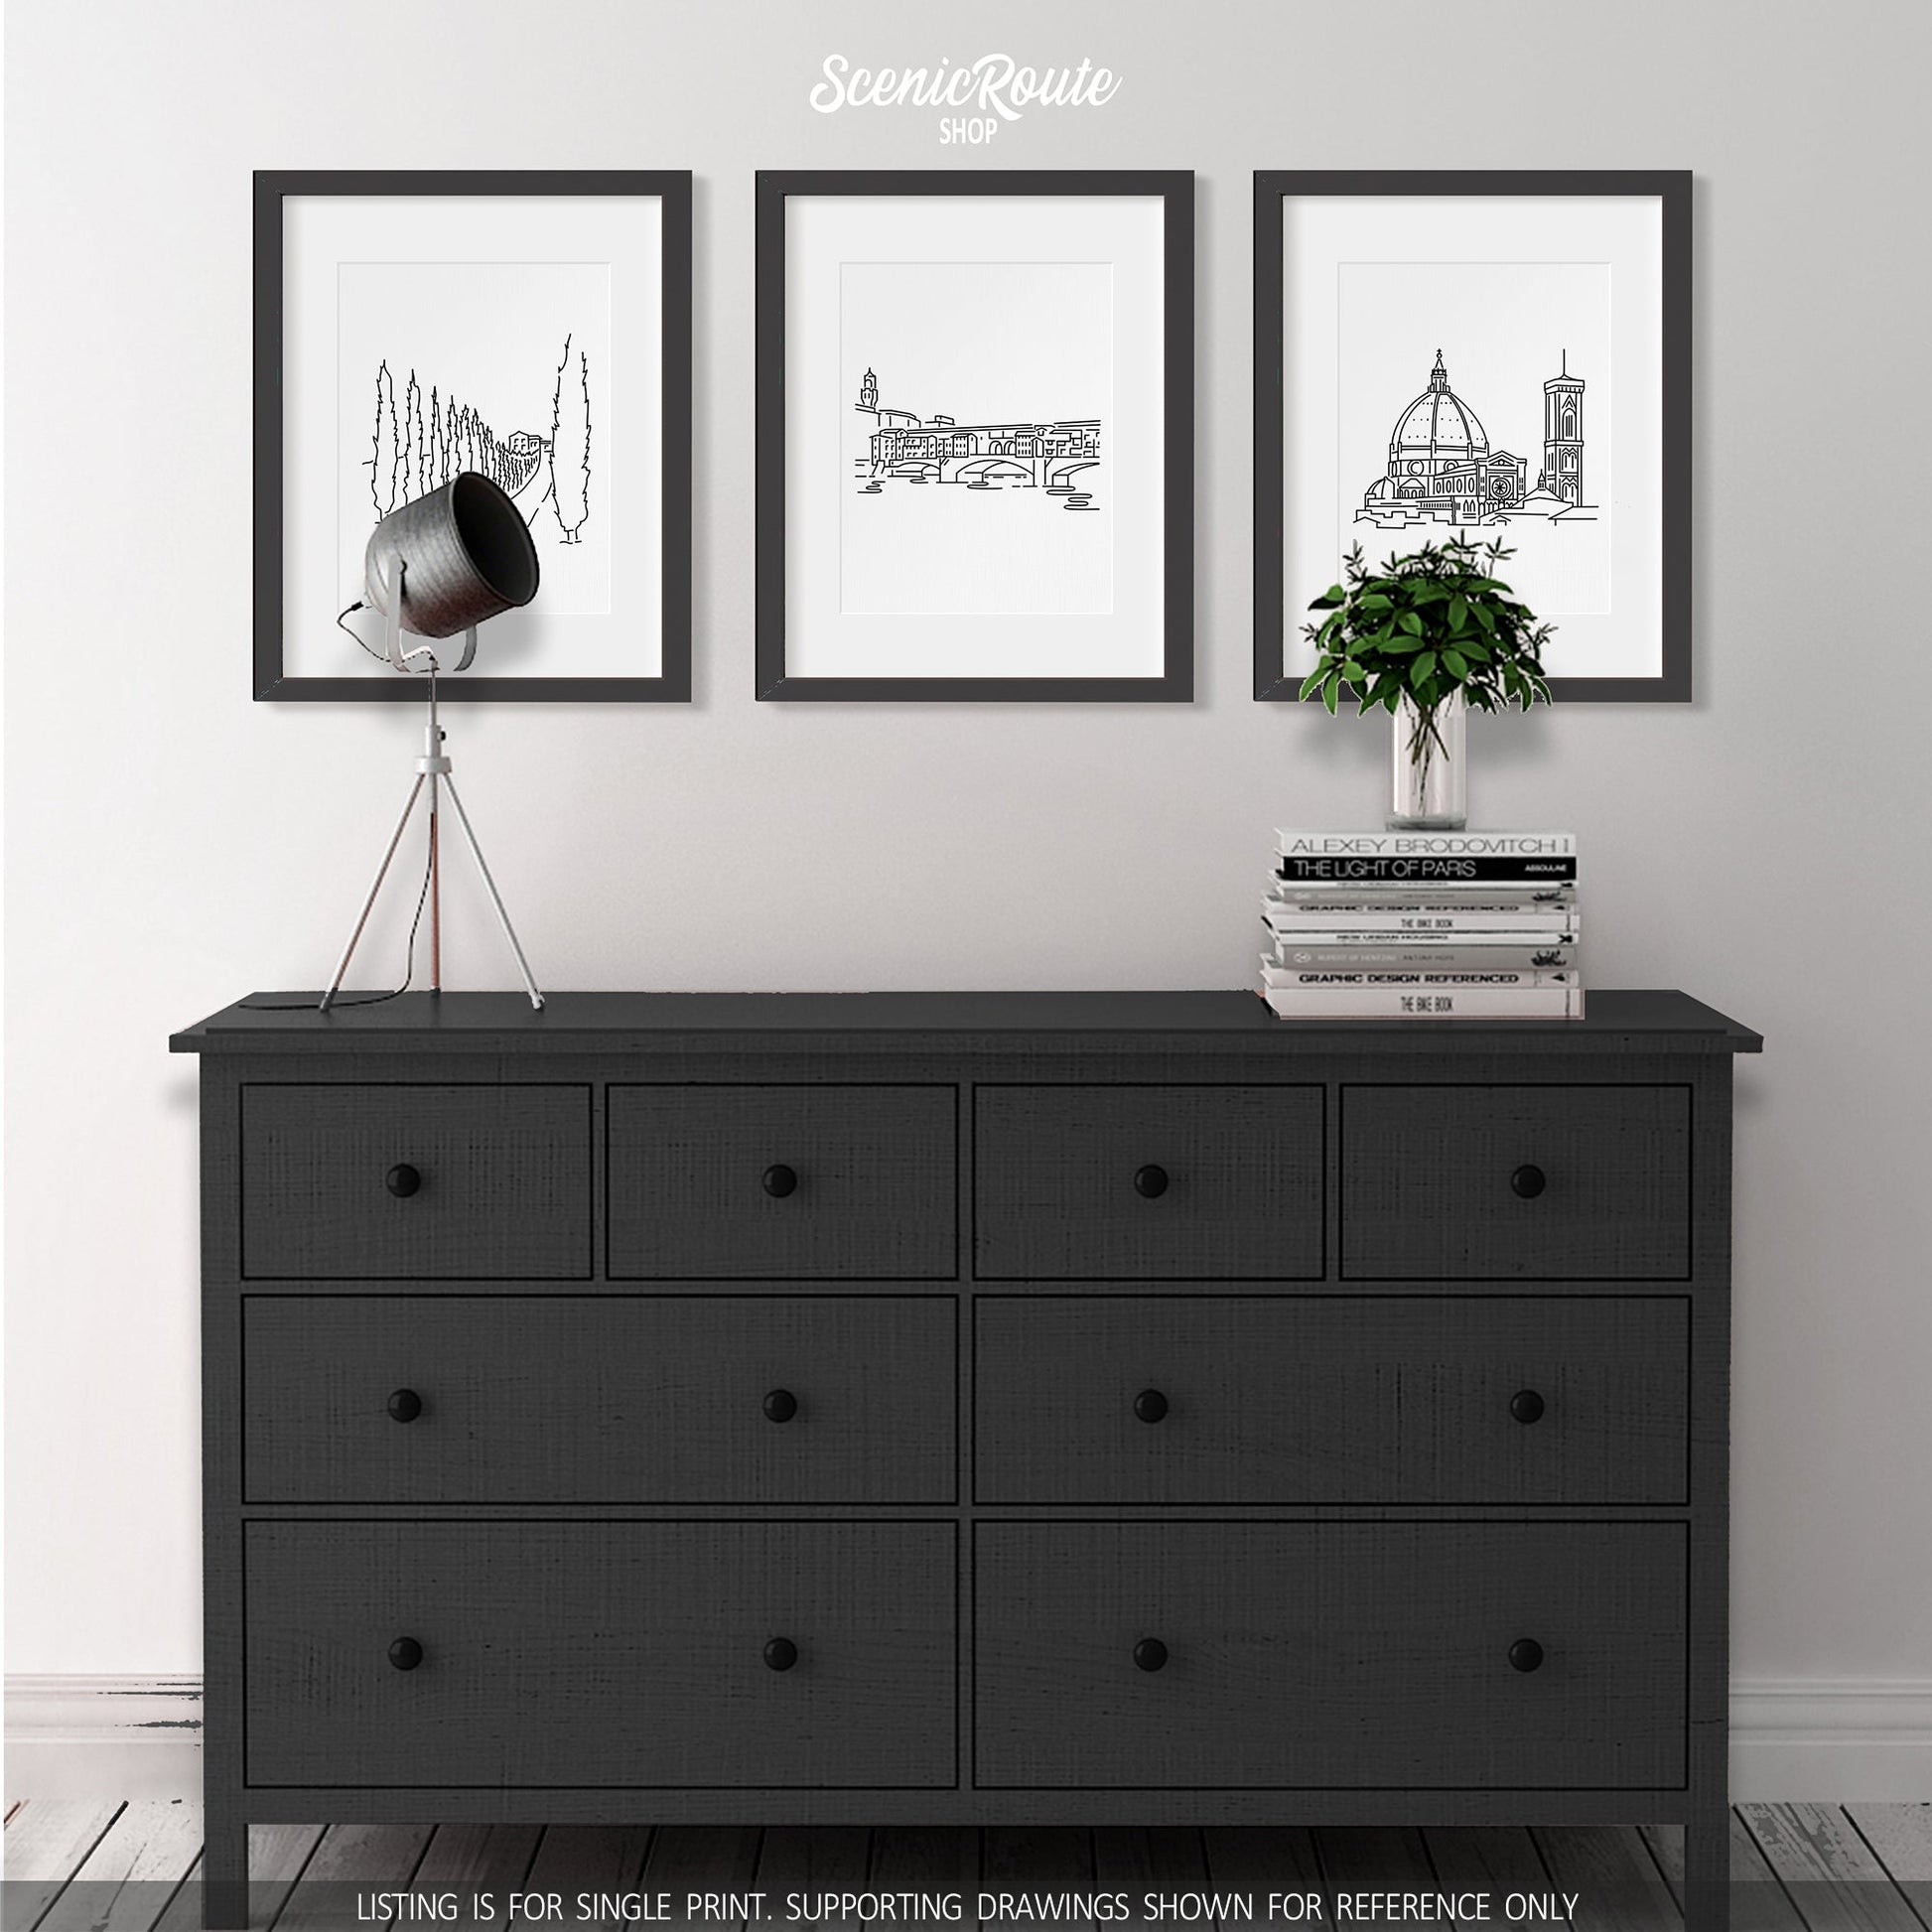 A group of three framed drawings on a wall above a dresser with books and a plant. The line art drawings include a Tuscany Drive, the Ponte Vecchio, and the Florence Duomo